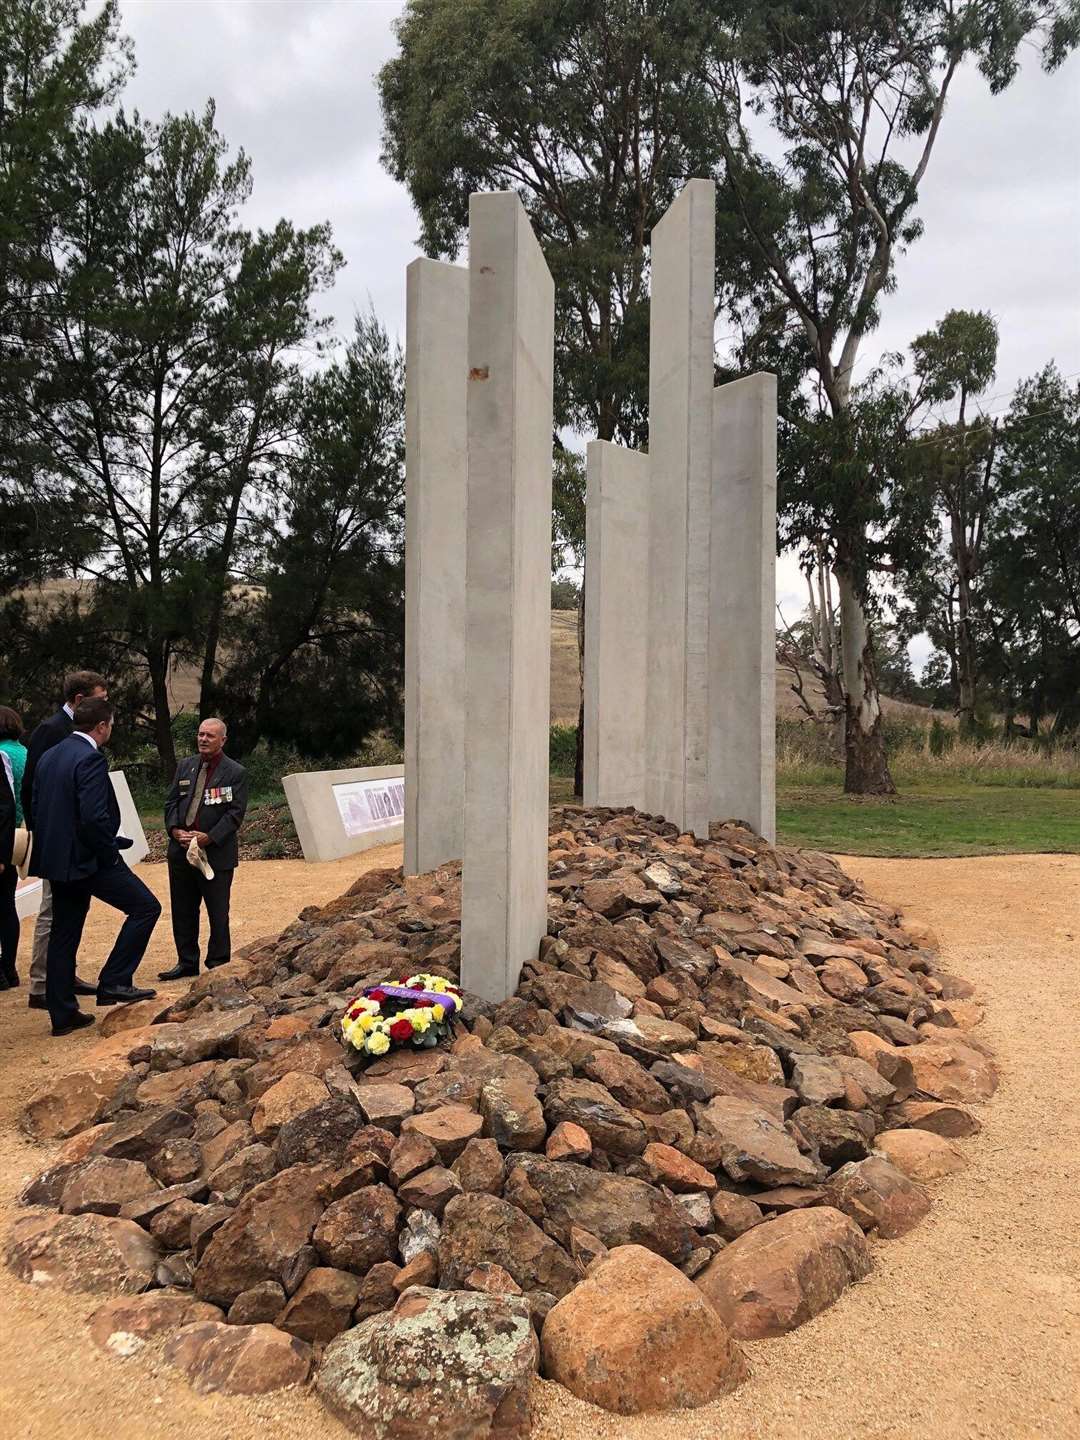 The military monument dedicated to all the Fairbridge children who served in the armed forces which was unveiled at the Fairbridge Children’s Park in Molong, NSW in March 2021 (Alana Calvert/PA)